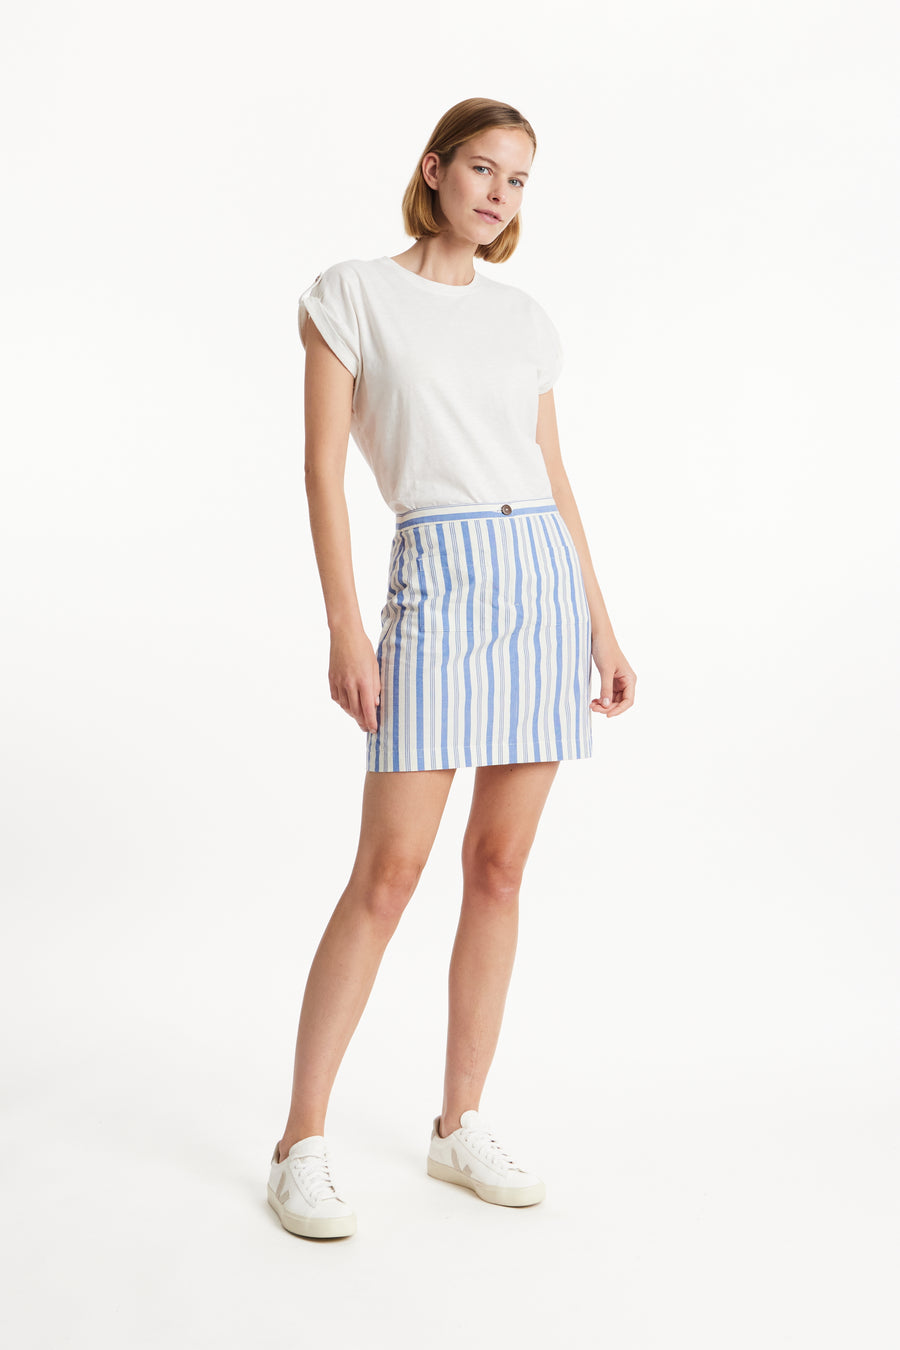 People Tree Fair Trade, Ethical & Sustainable Tica Striped Skirt in Blue stripe 100% Organic Cotton